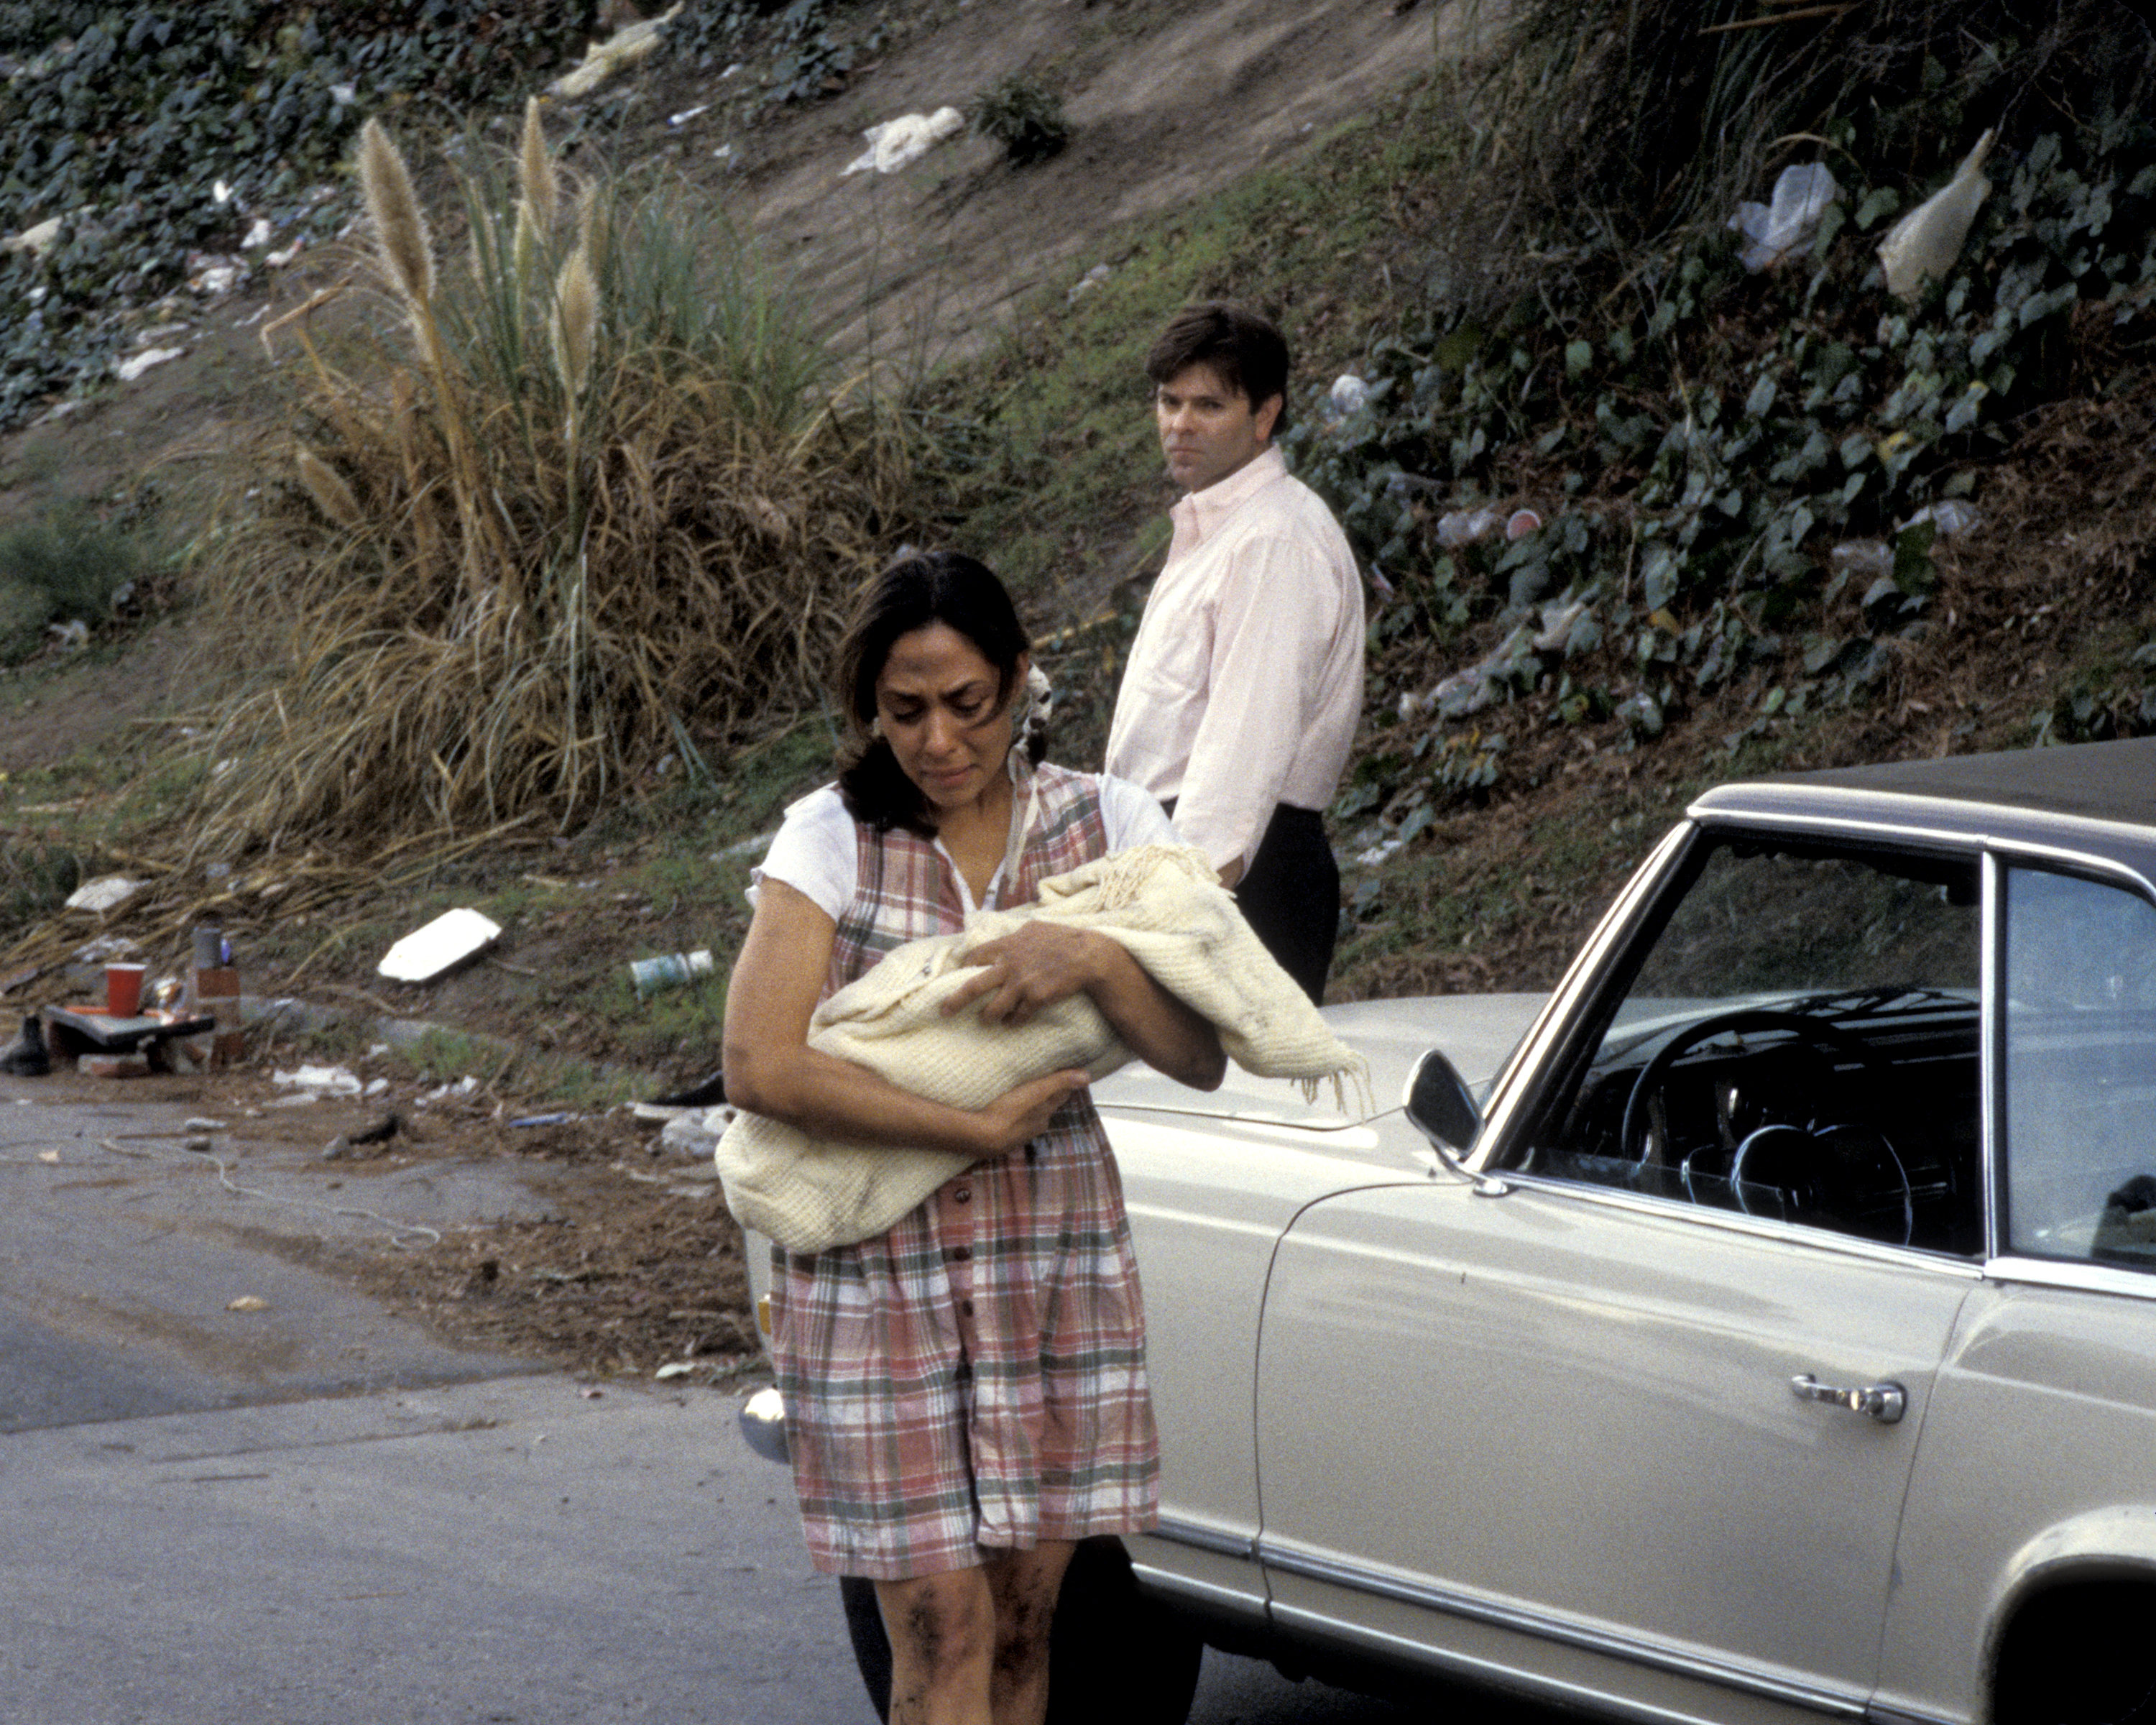 Daniel Gesar (Dan Coplan) tries to help Jigsonsashe (Giovanna Brokaw ), a disturbed native American woman whose baby has died. Who later accuses him of killing her baby.